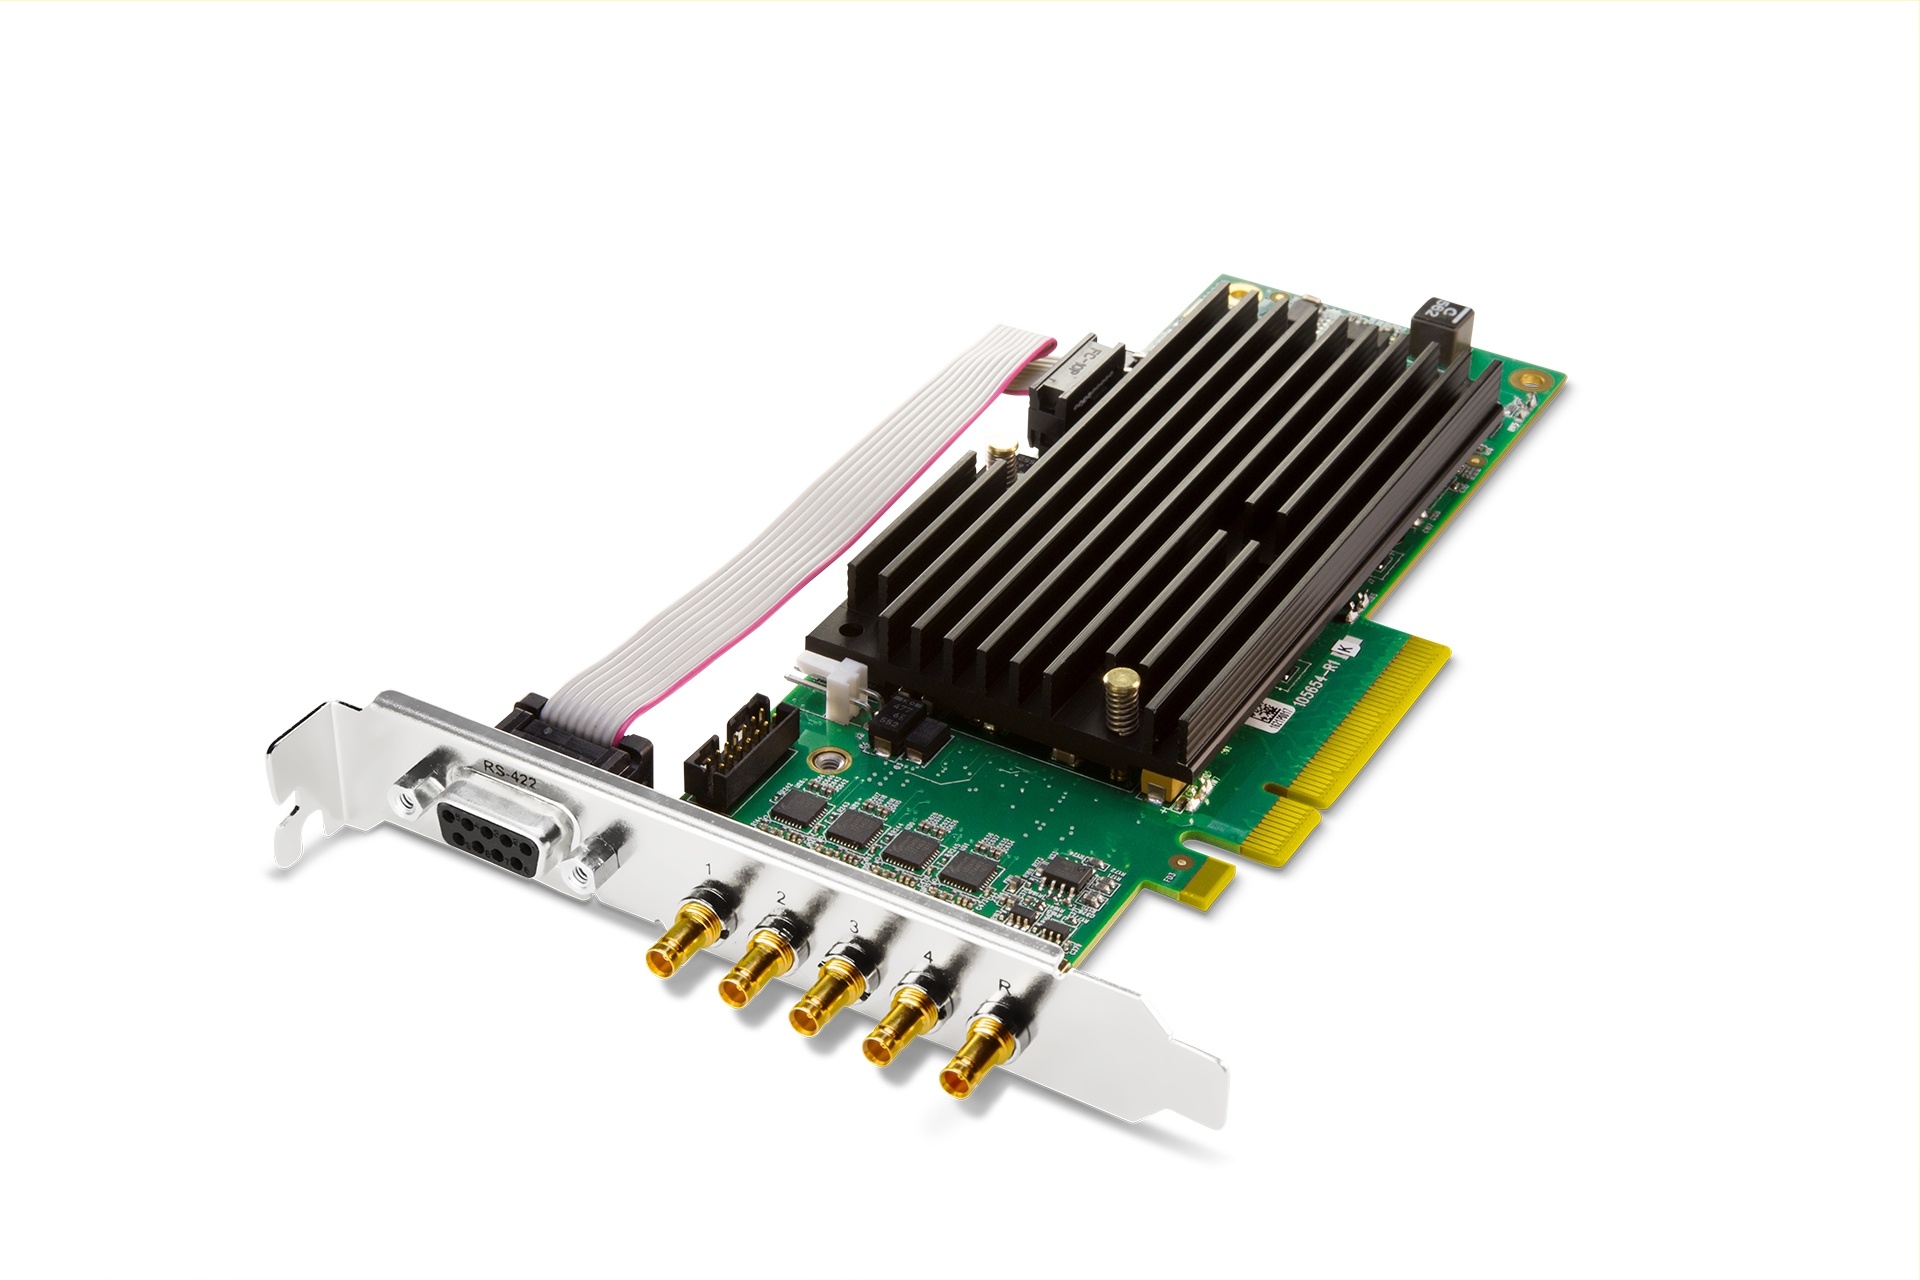 AJA CRV44-T-NF 8-Lane Pcie 2.0, 4x SDI, Independently Configurable (Fanless Version)